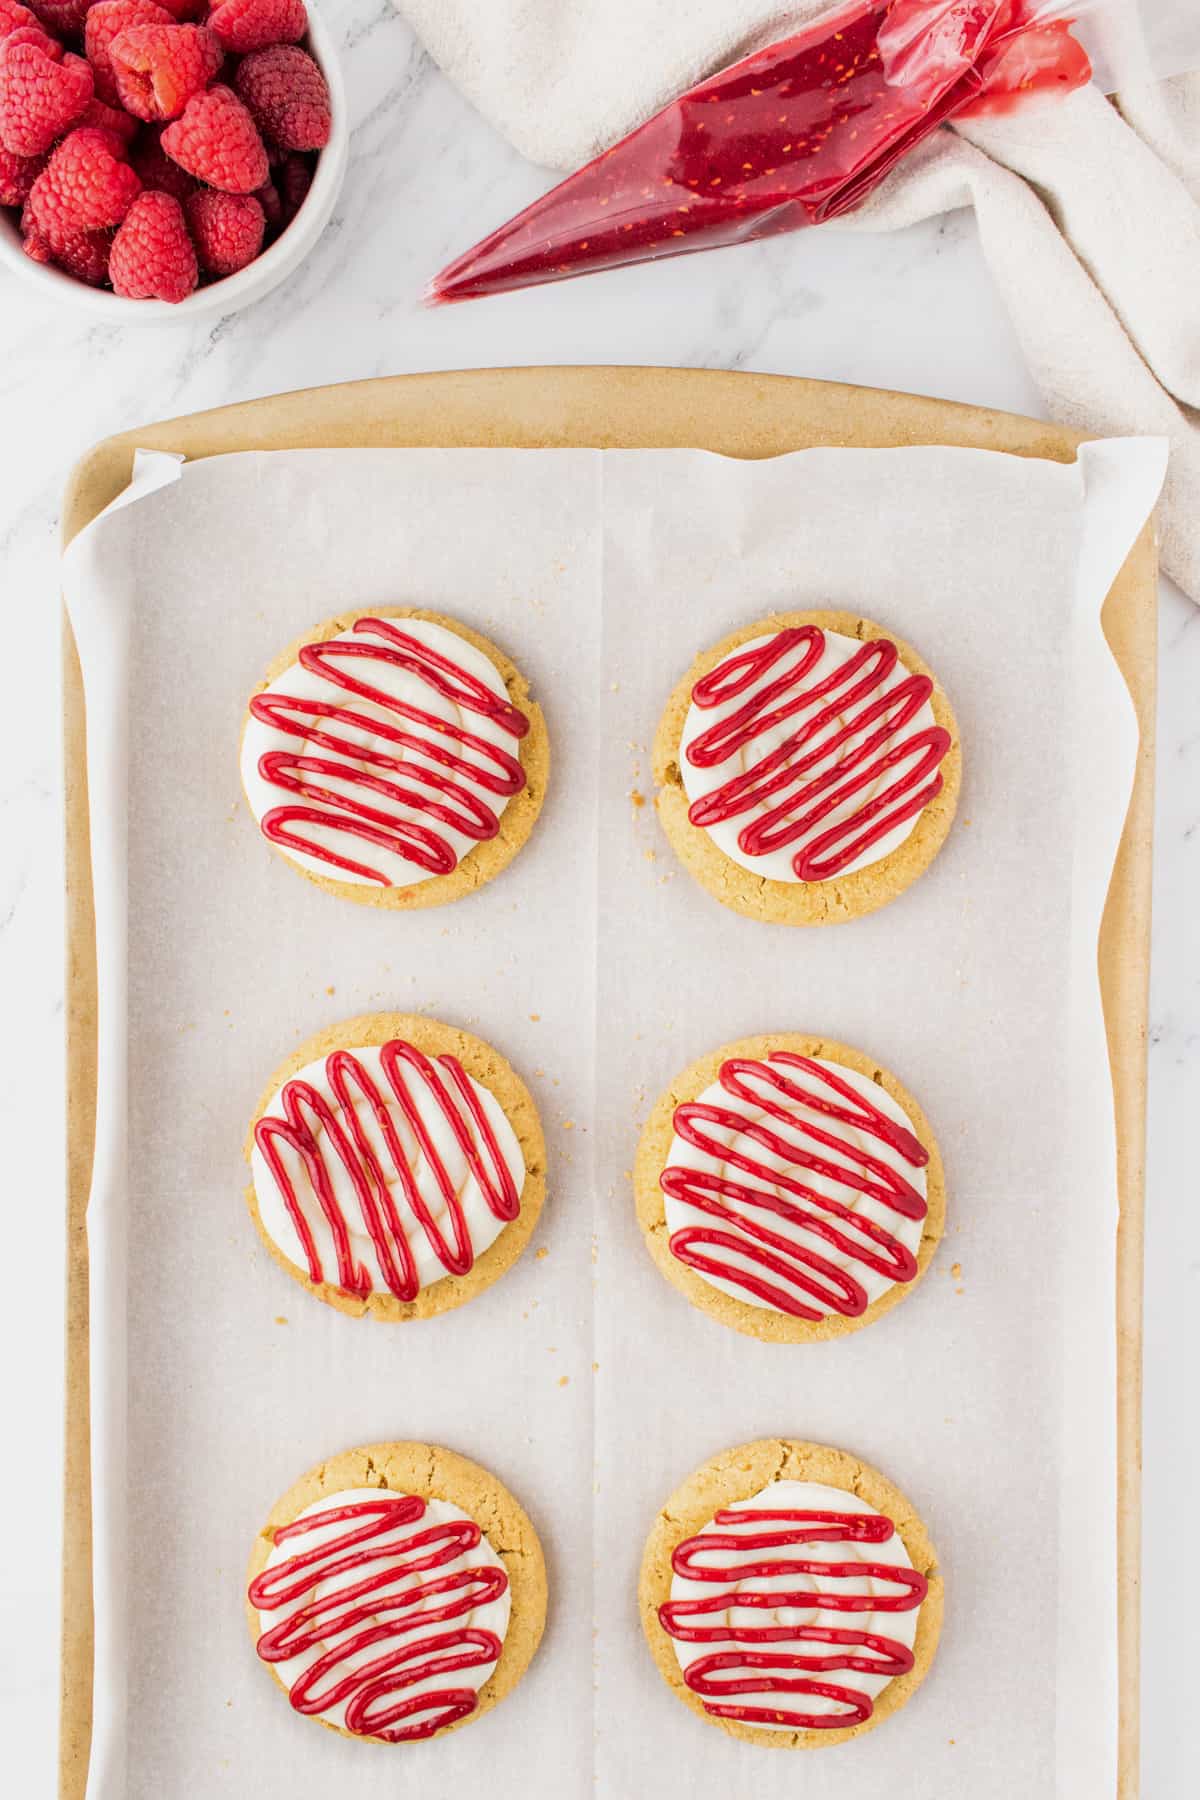 Raspberry cheesecake cookies on a baking sheet after the raspberry preserves are drizzled on top of the cream cheese frosting.